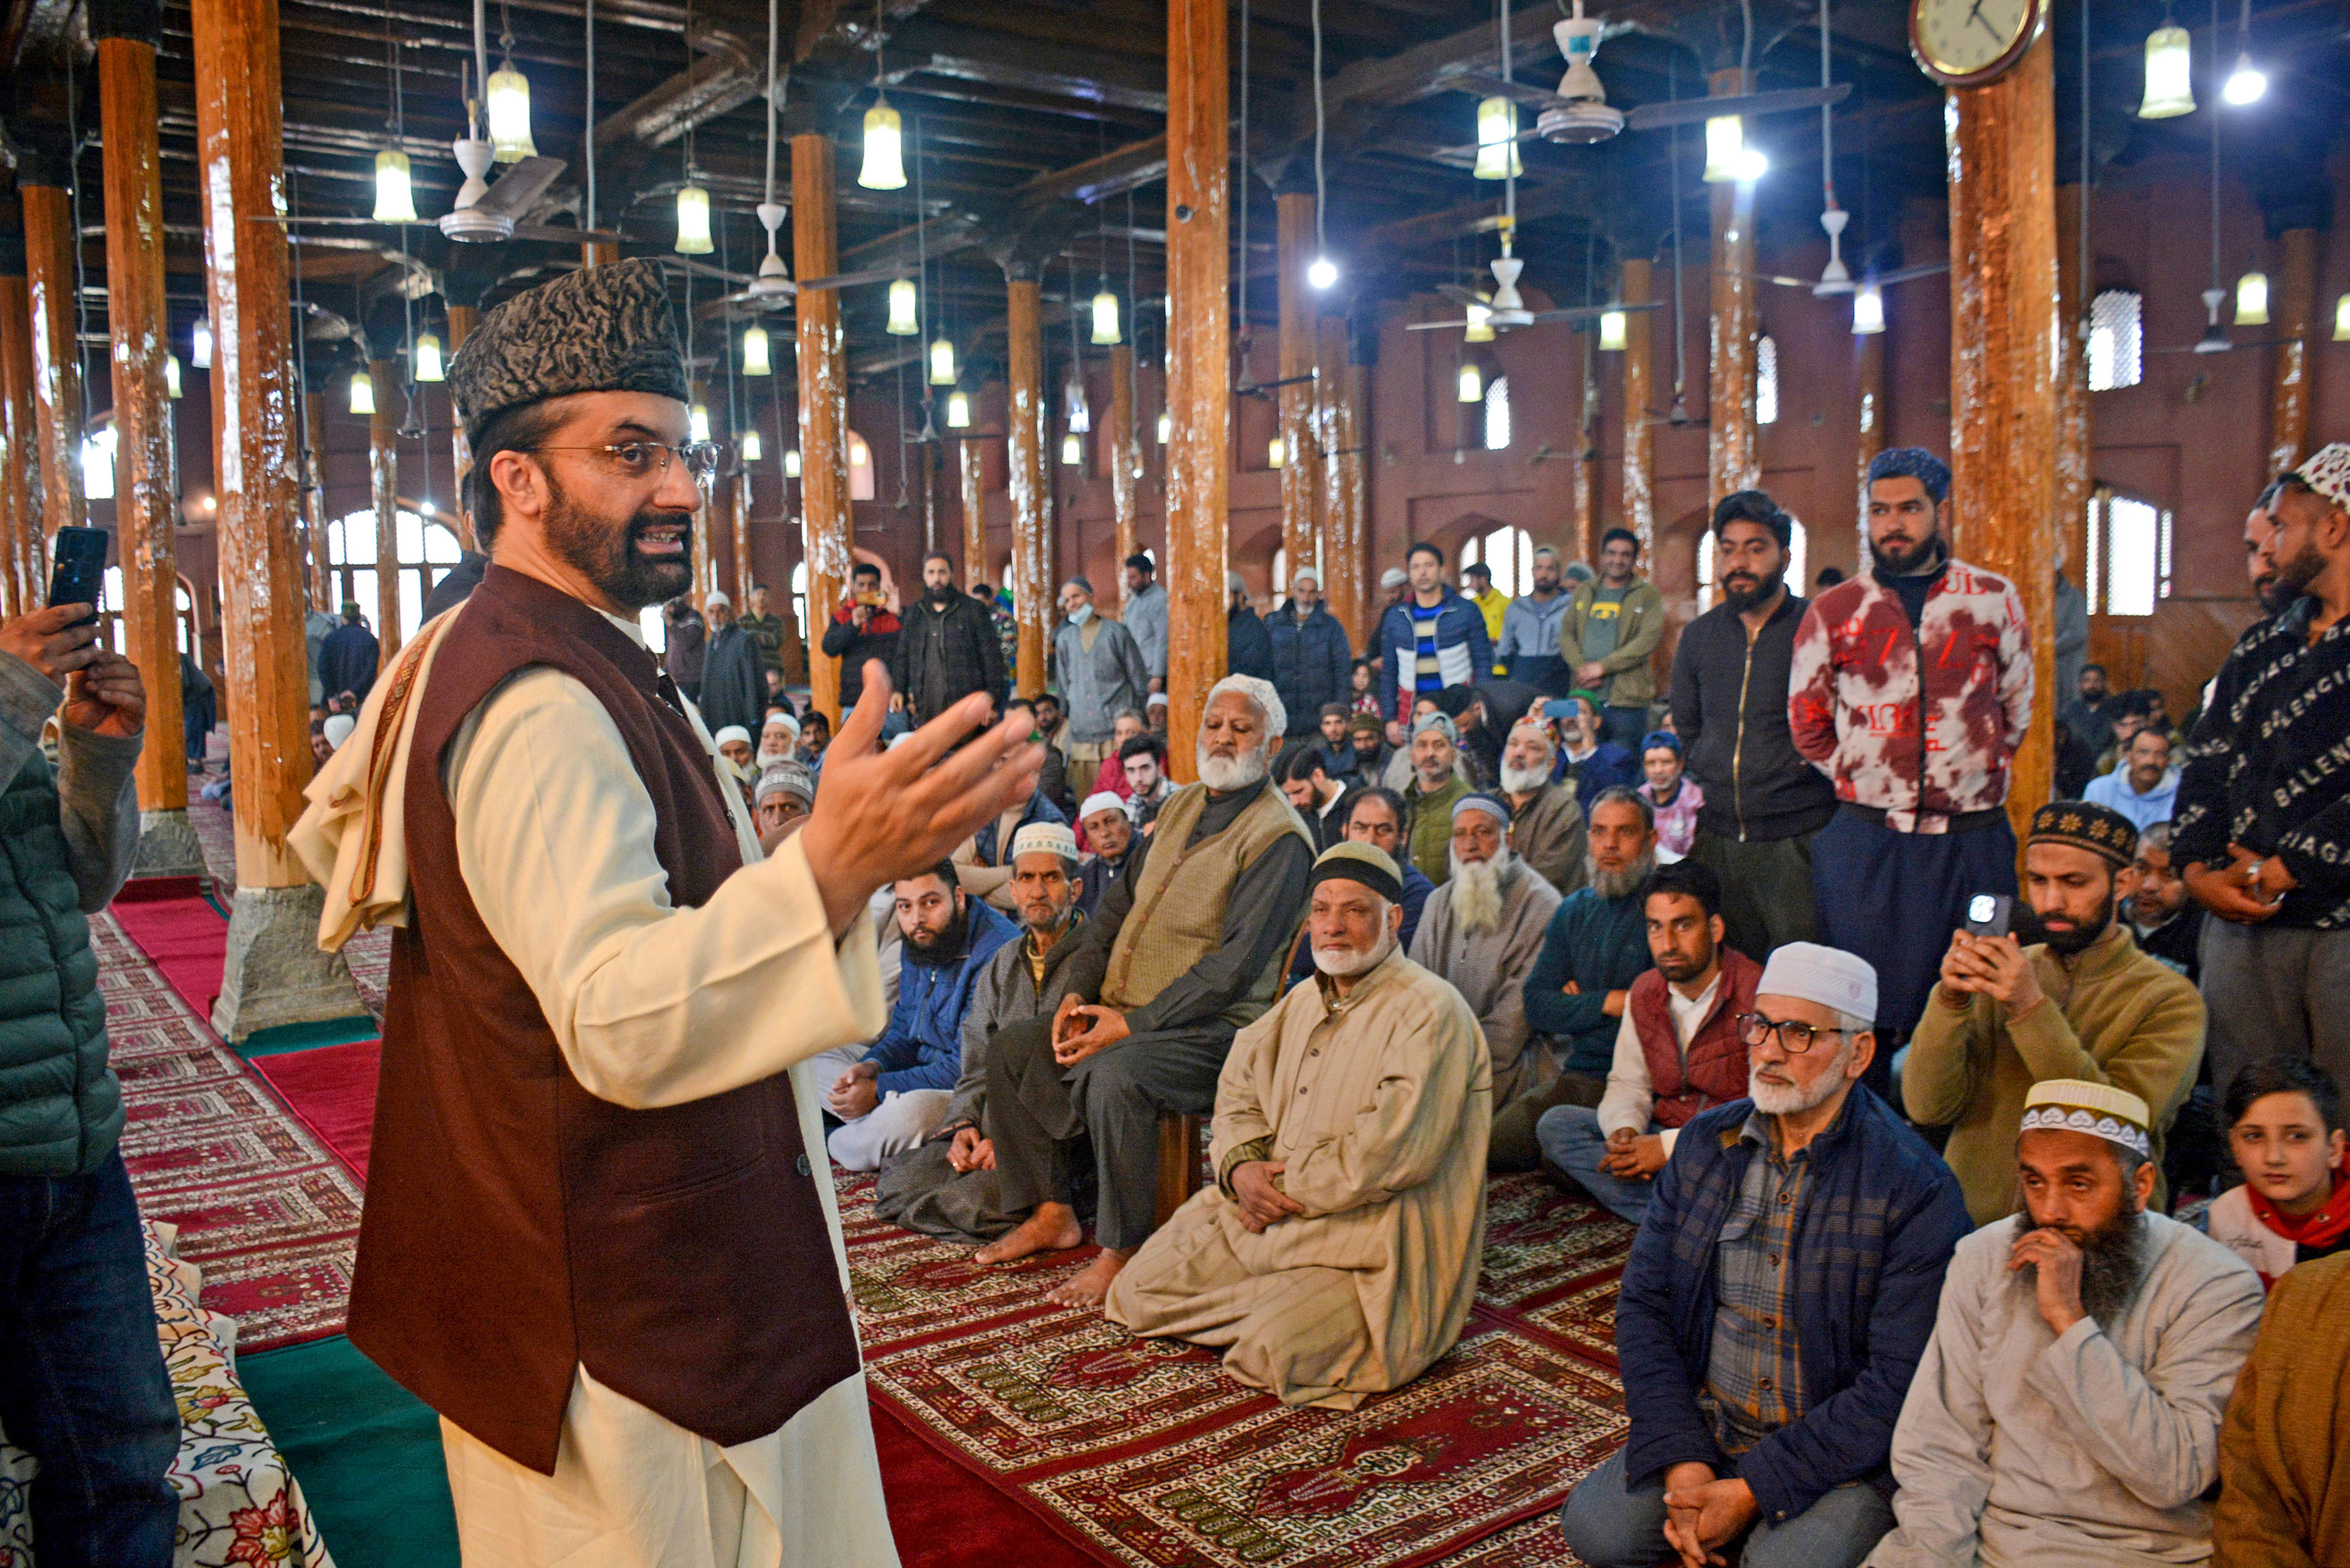 mirwaiz placed under house arrest, claims outfit